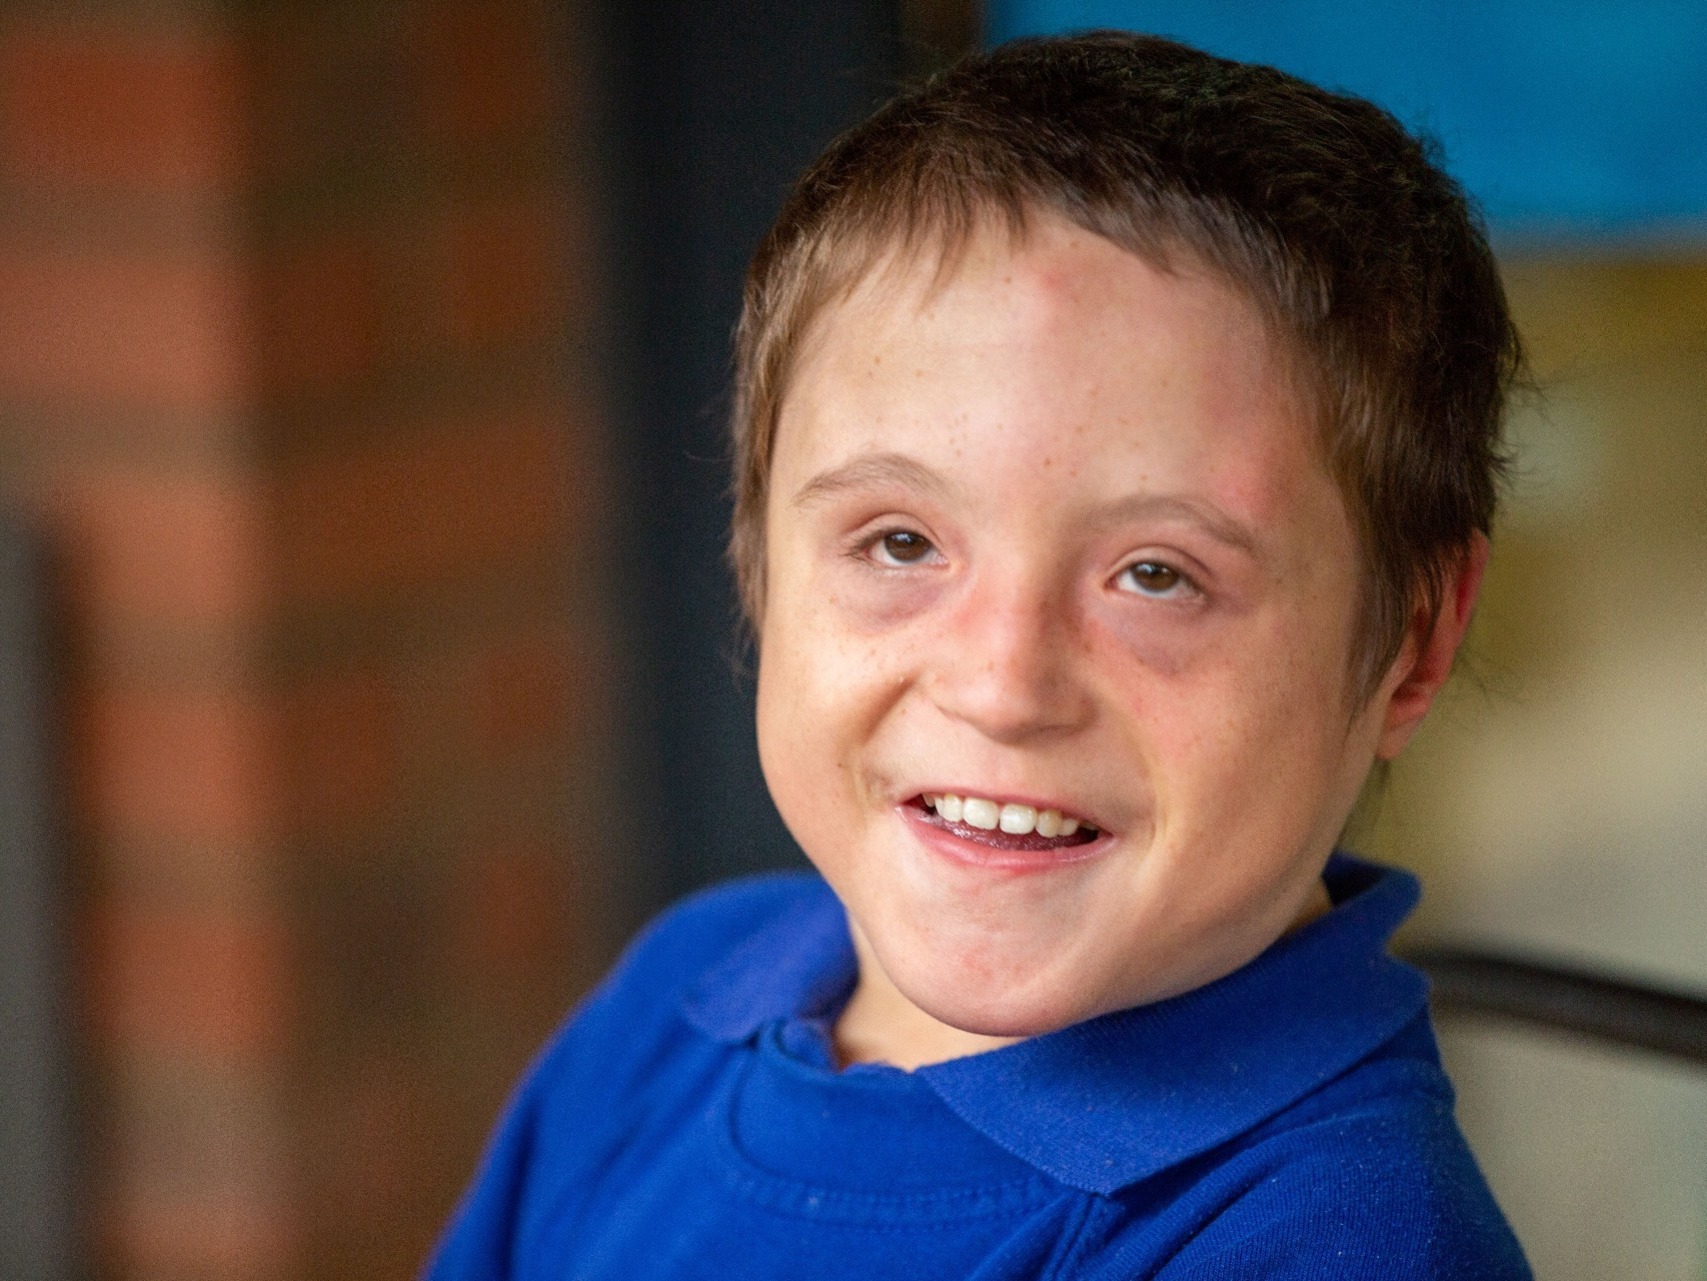 Young disabled boy with learning difficulties school portrait